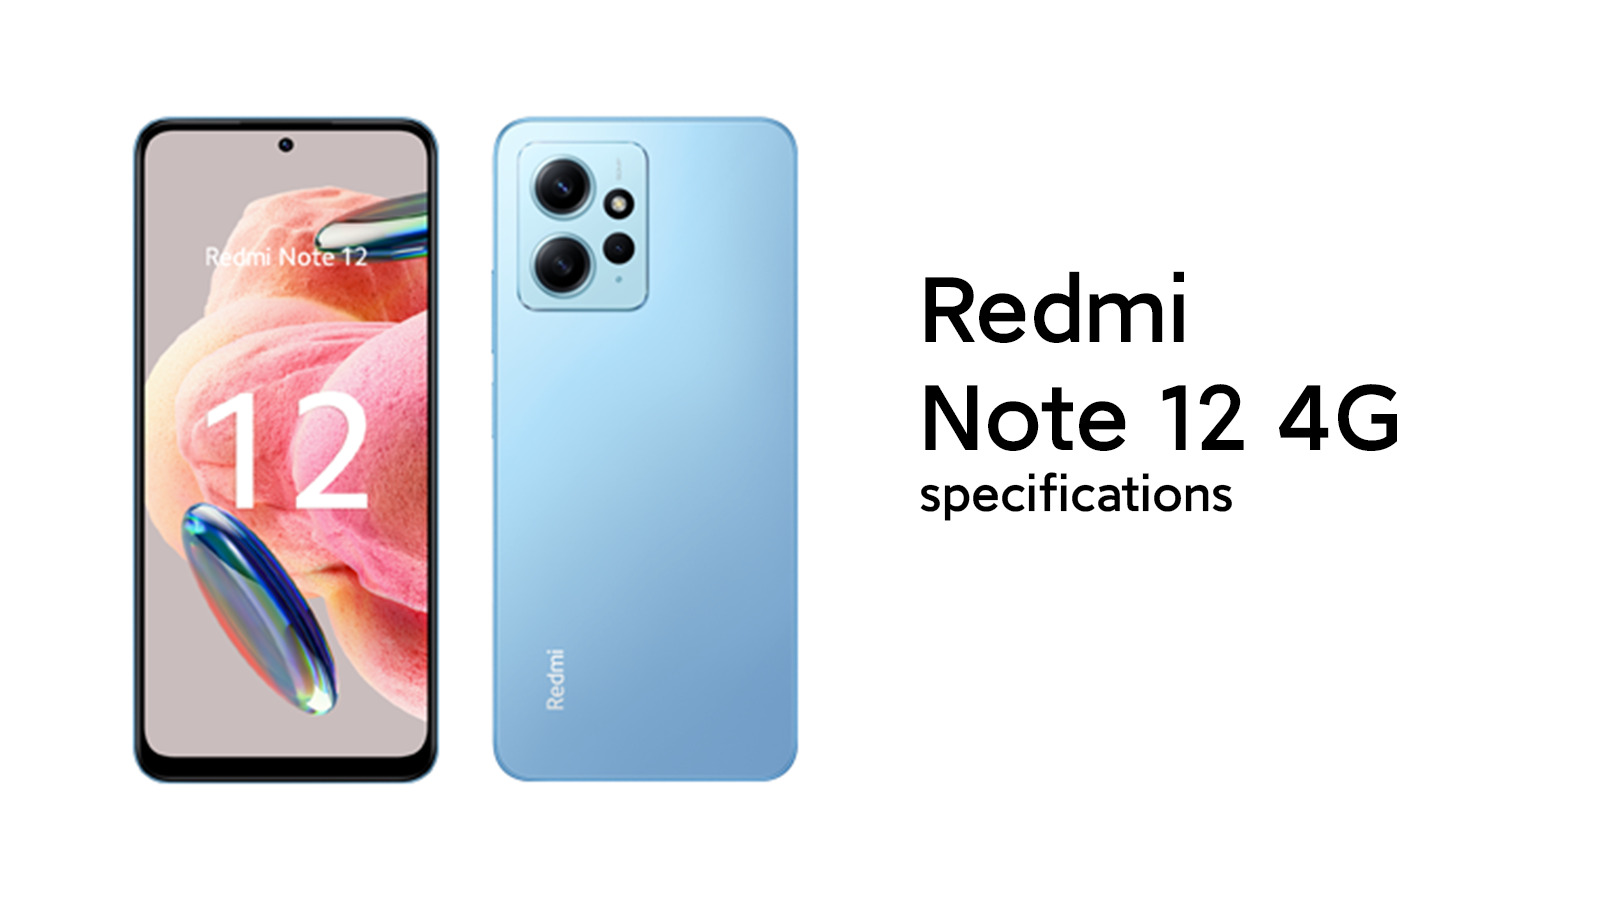 Full specifications and pricing of upcoming Redmi Note 12 4G are here! 